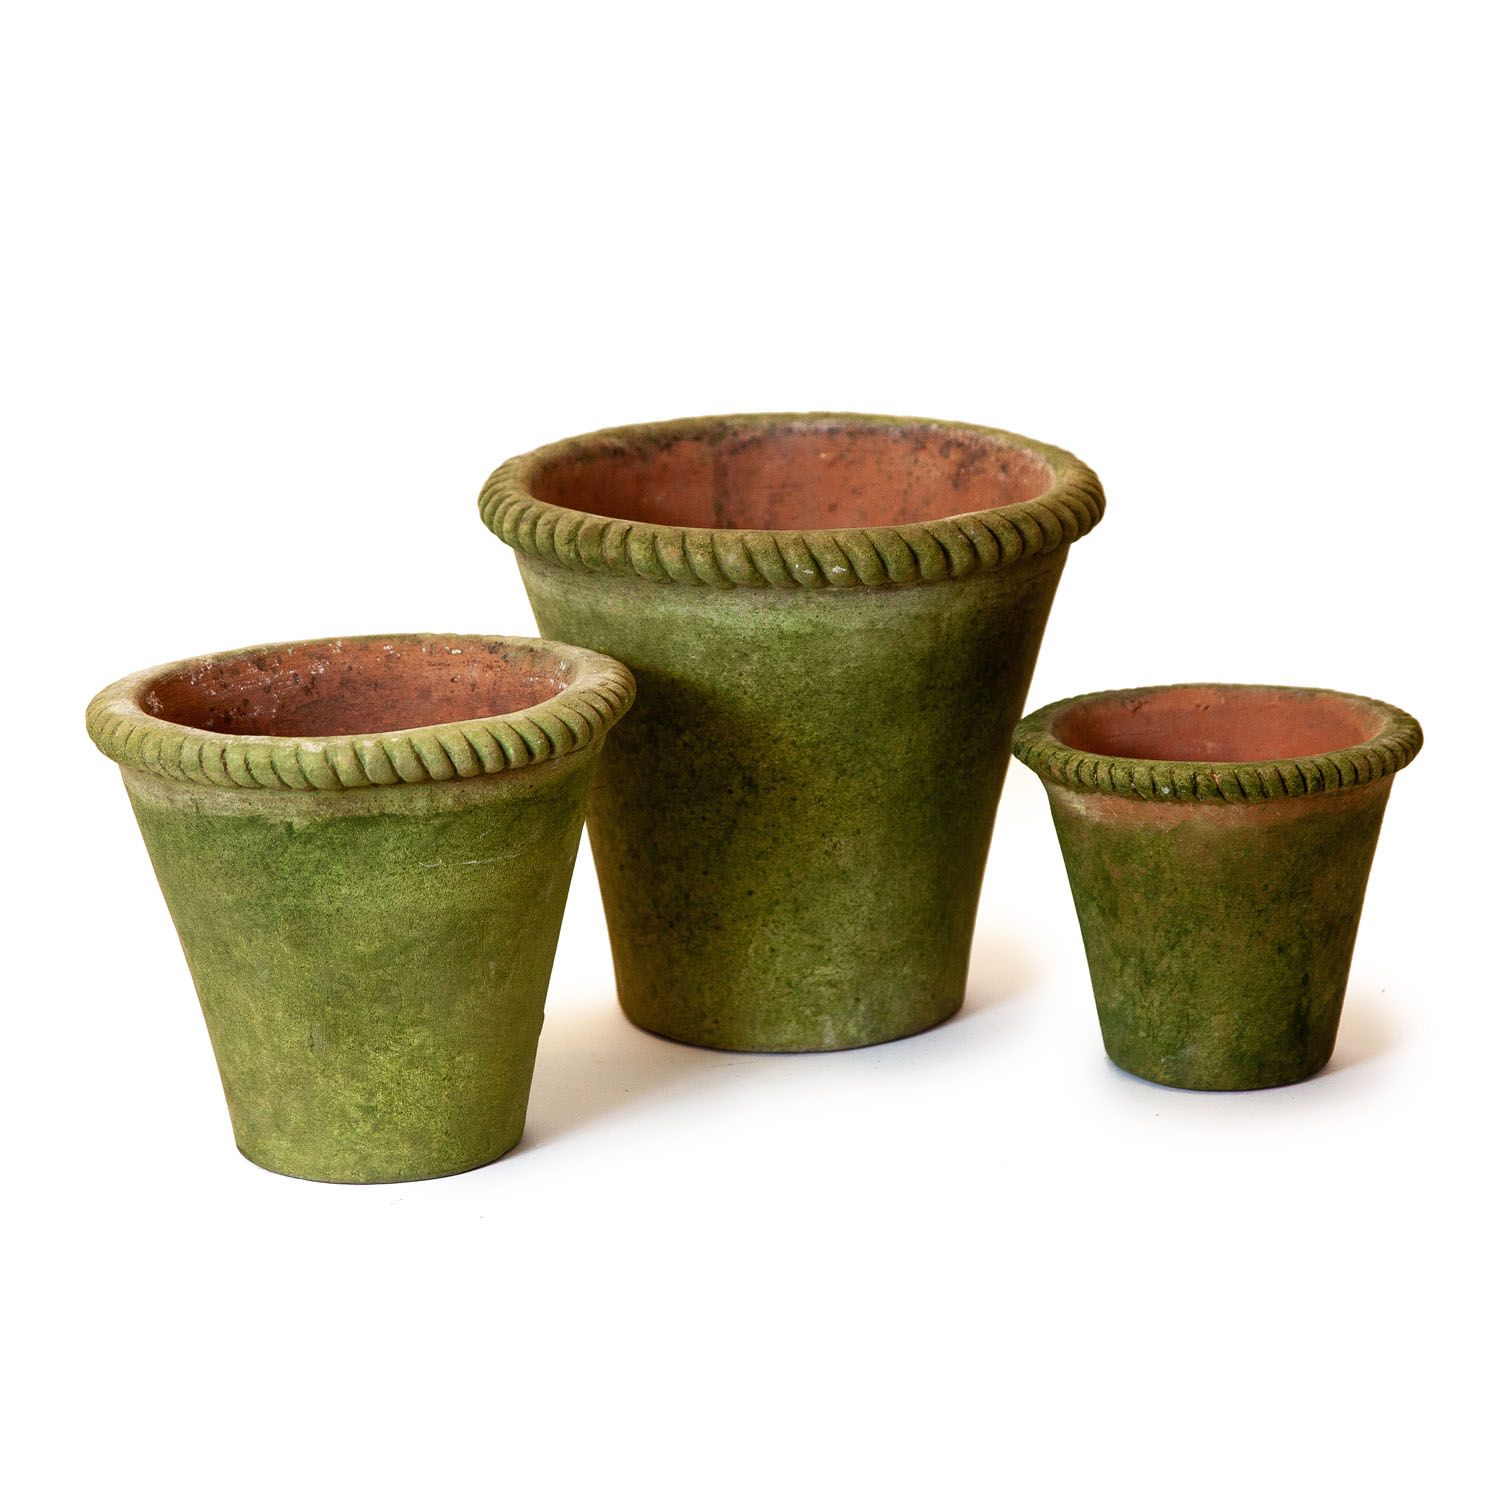 Aged Mecate Planters